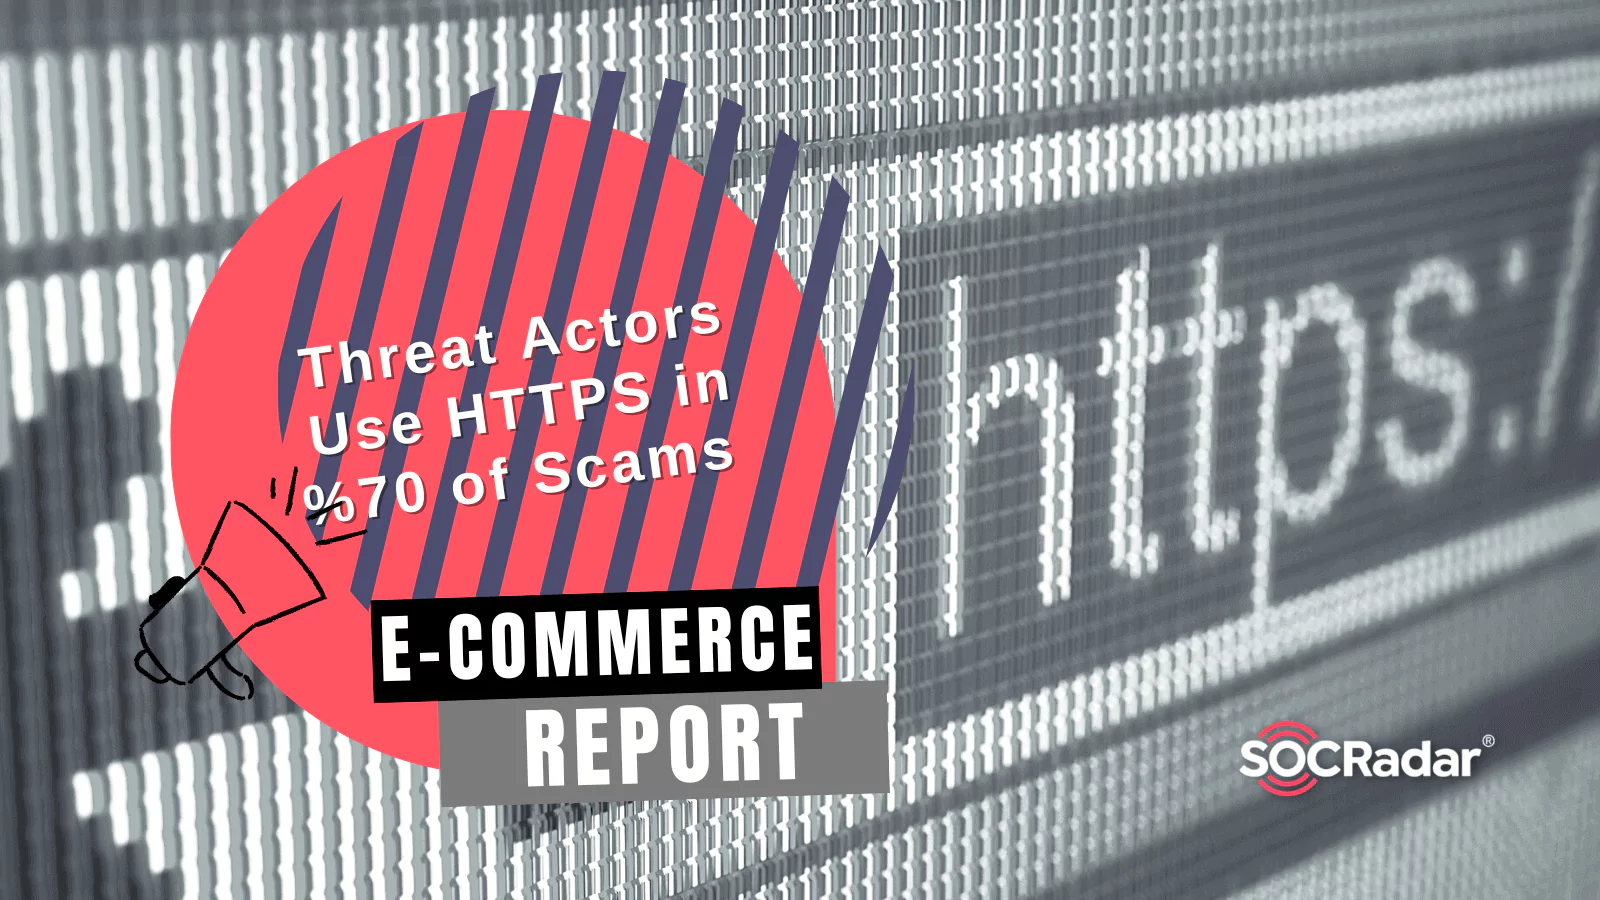 SOCRadar® Cyber Intelligence Inc. | E-Commerce Report: Threat Actors Use HTTPS in 70% of Scams